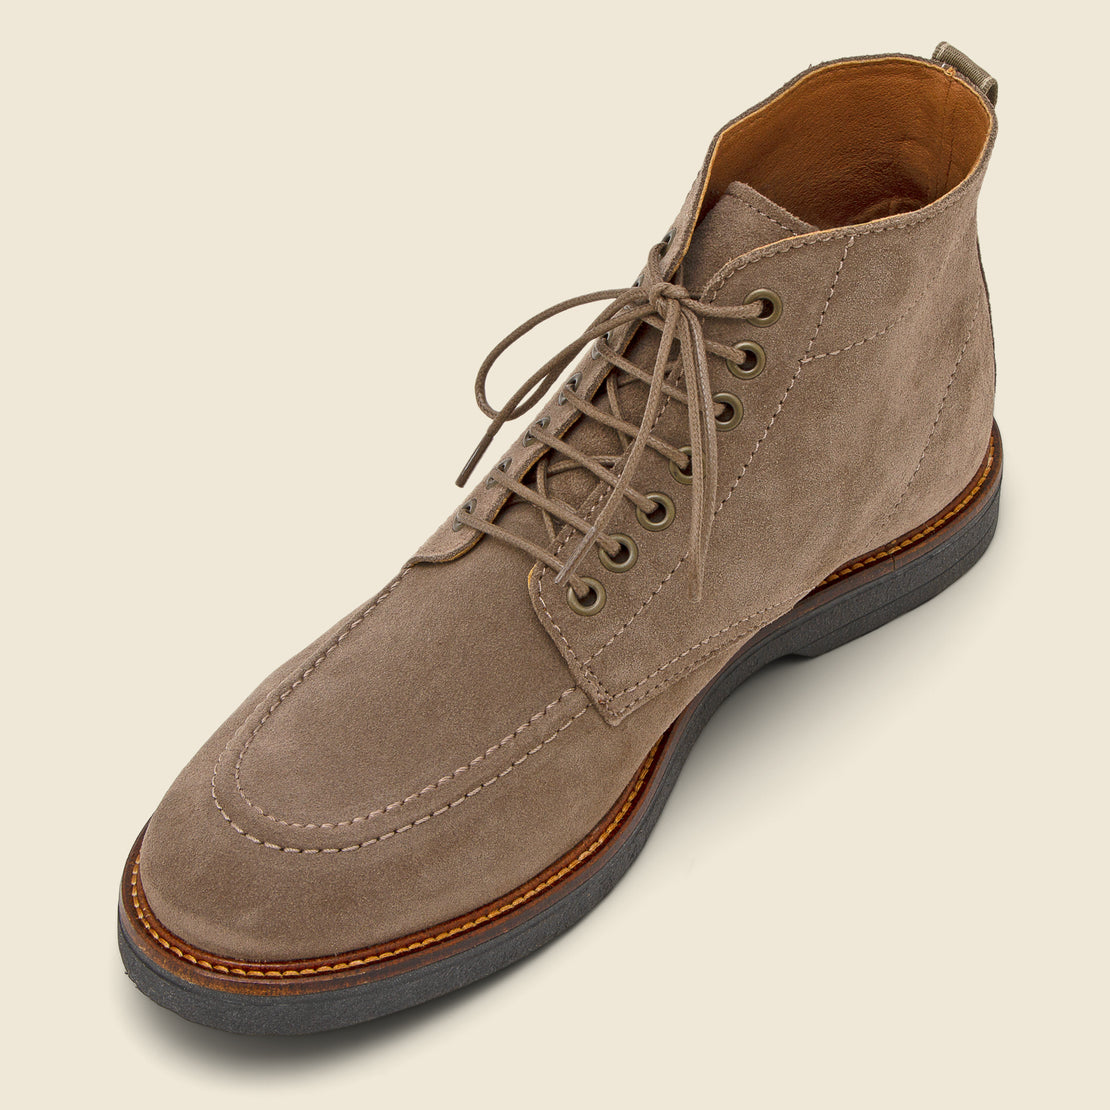 Kip Suede Apron Boot - Taupe - Shoe the Bear - STAG Provisions - Shoes - Boots / Chukkas